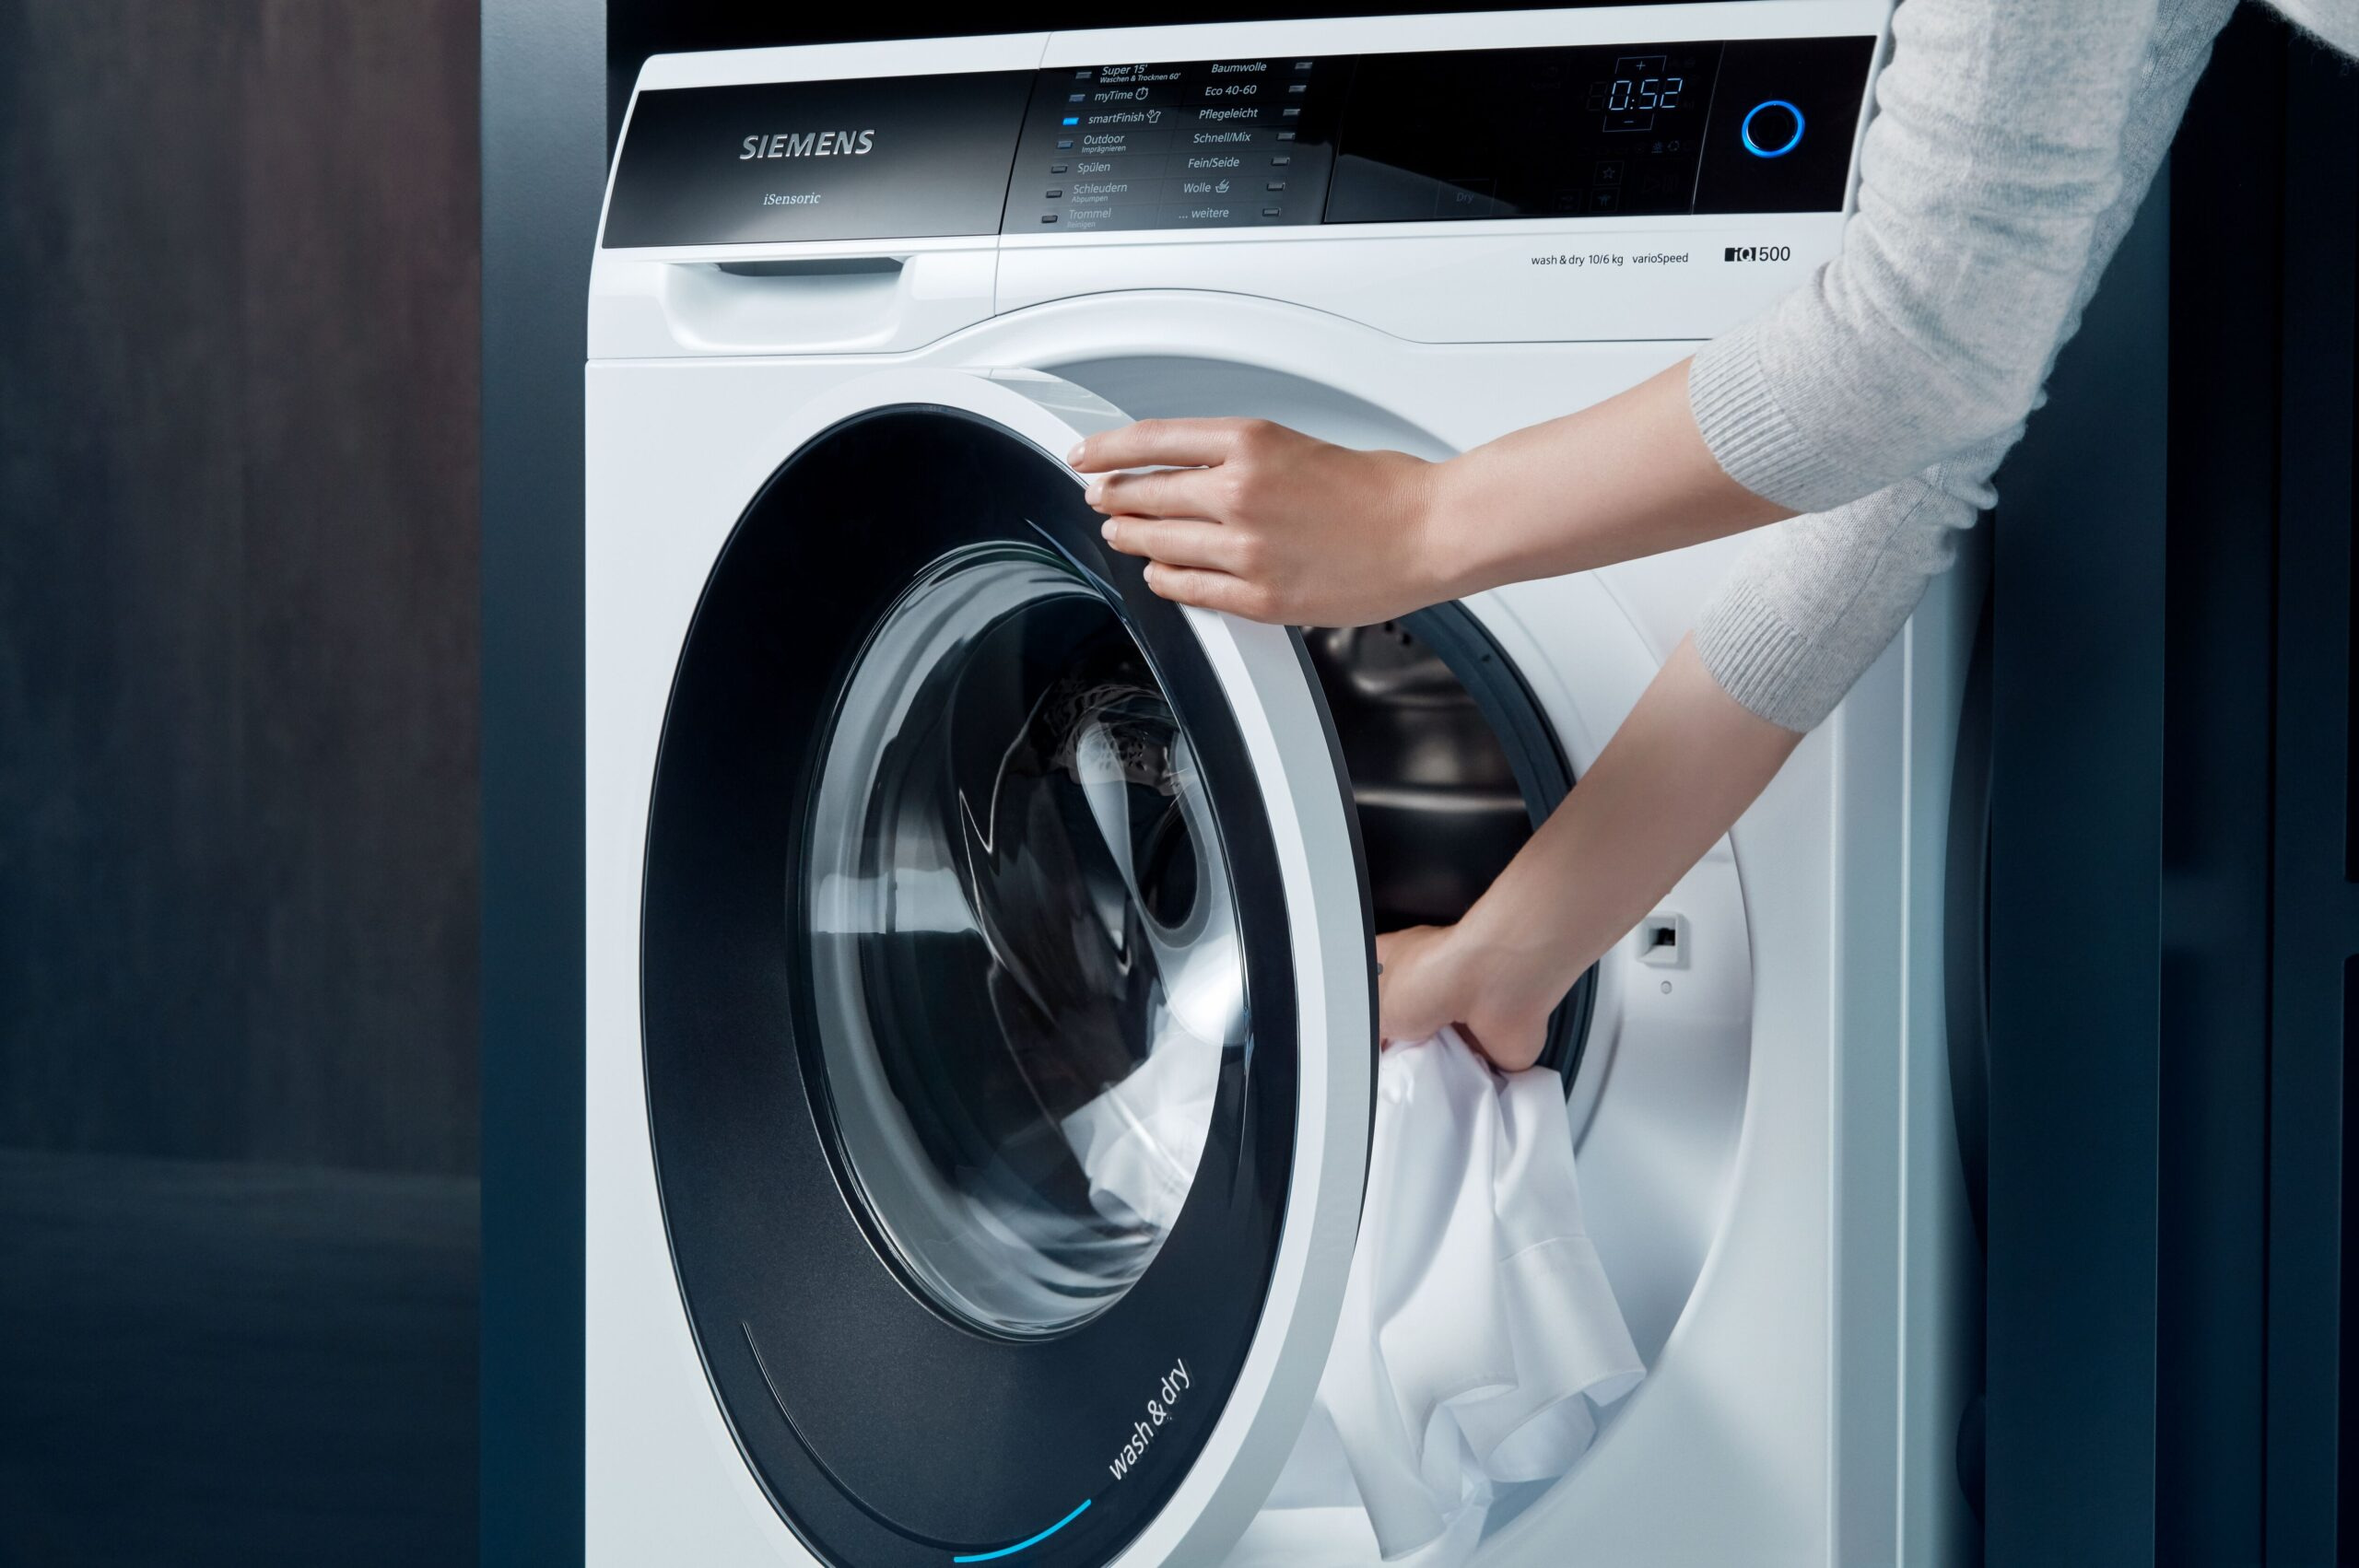 60817e0ae4b0eb74cf1a9a7b_Product in use_washer-dryer_high-res-preview